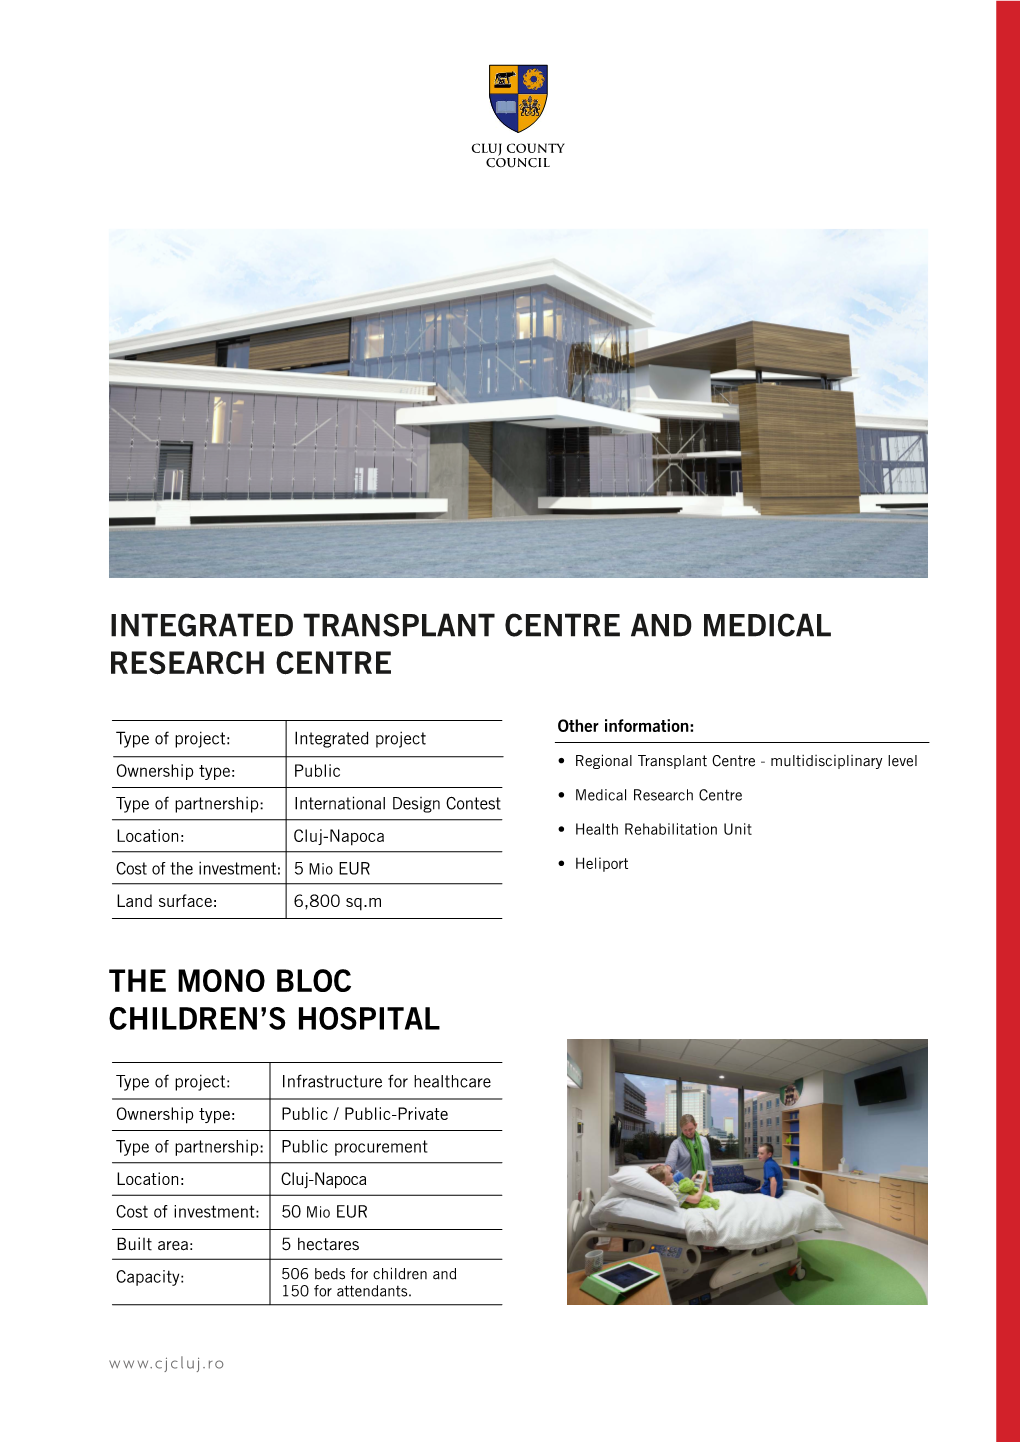 Integrated Transplant Centre and Medical Research Centre The